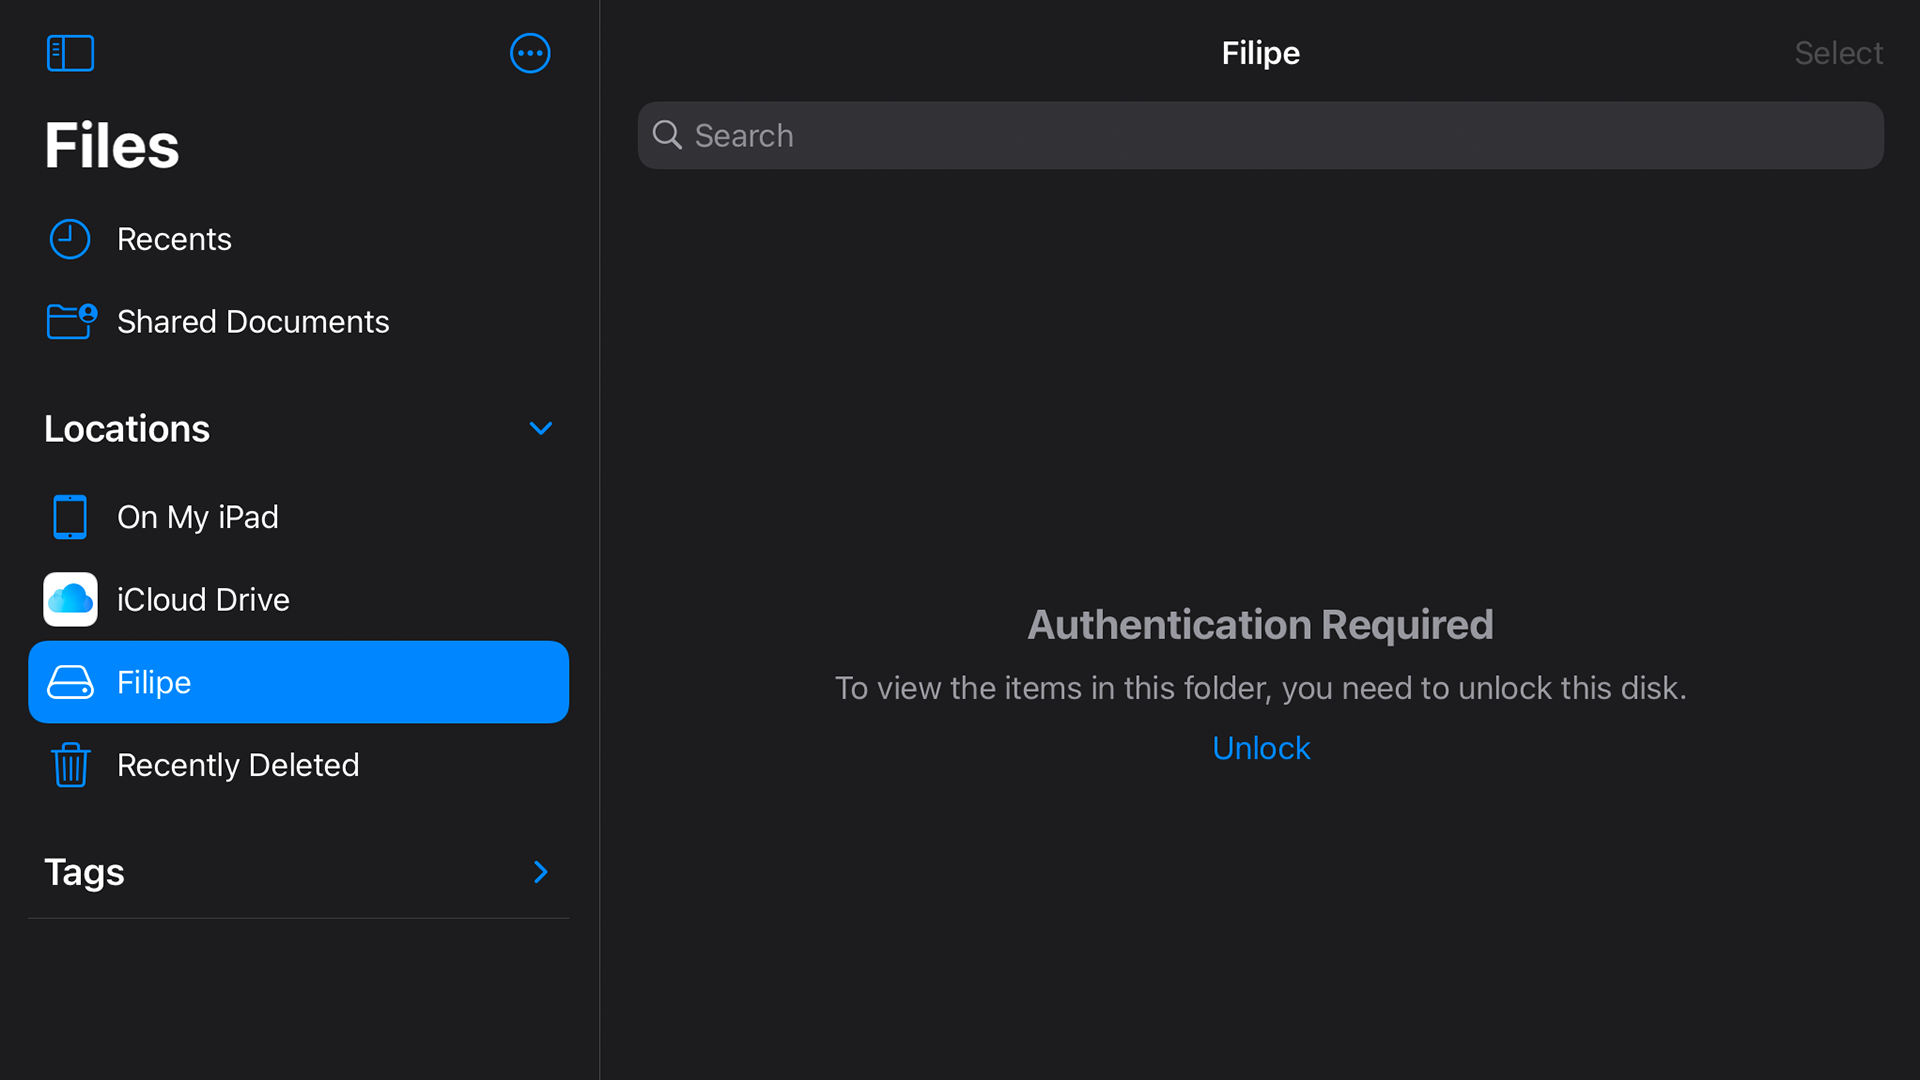 adds APFS encrypted drive support to iOS 14 and APFS Time backups to macOS Big Sur - 9to5Mac